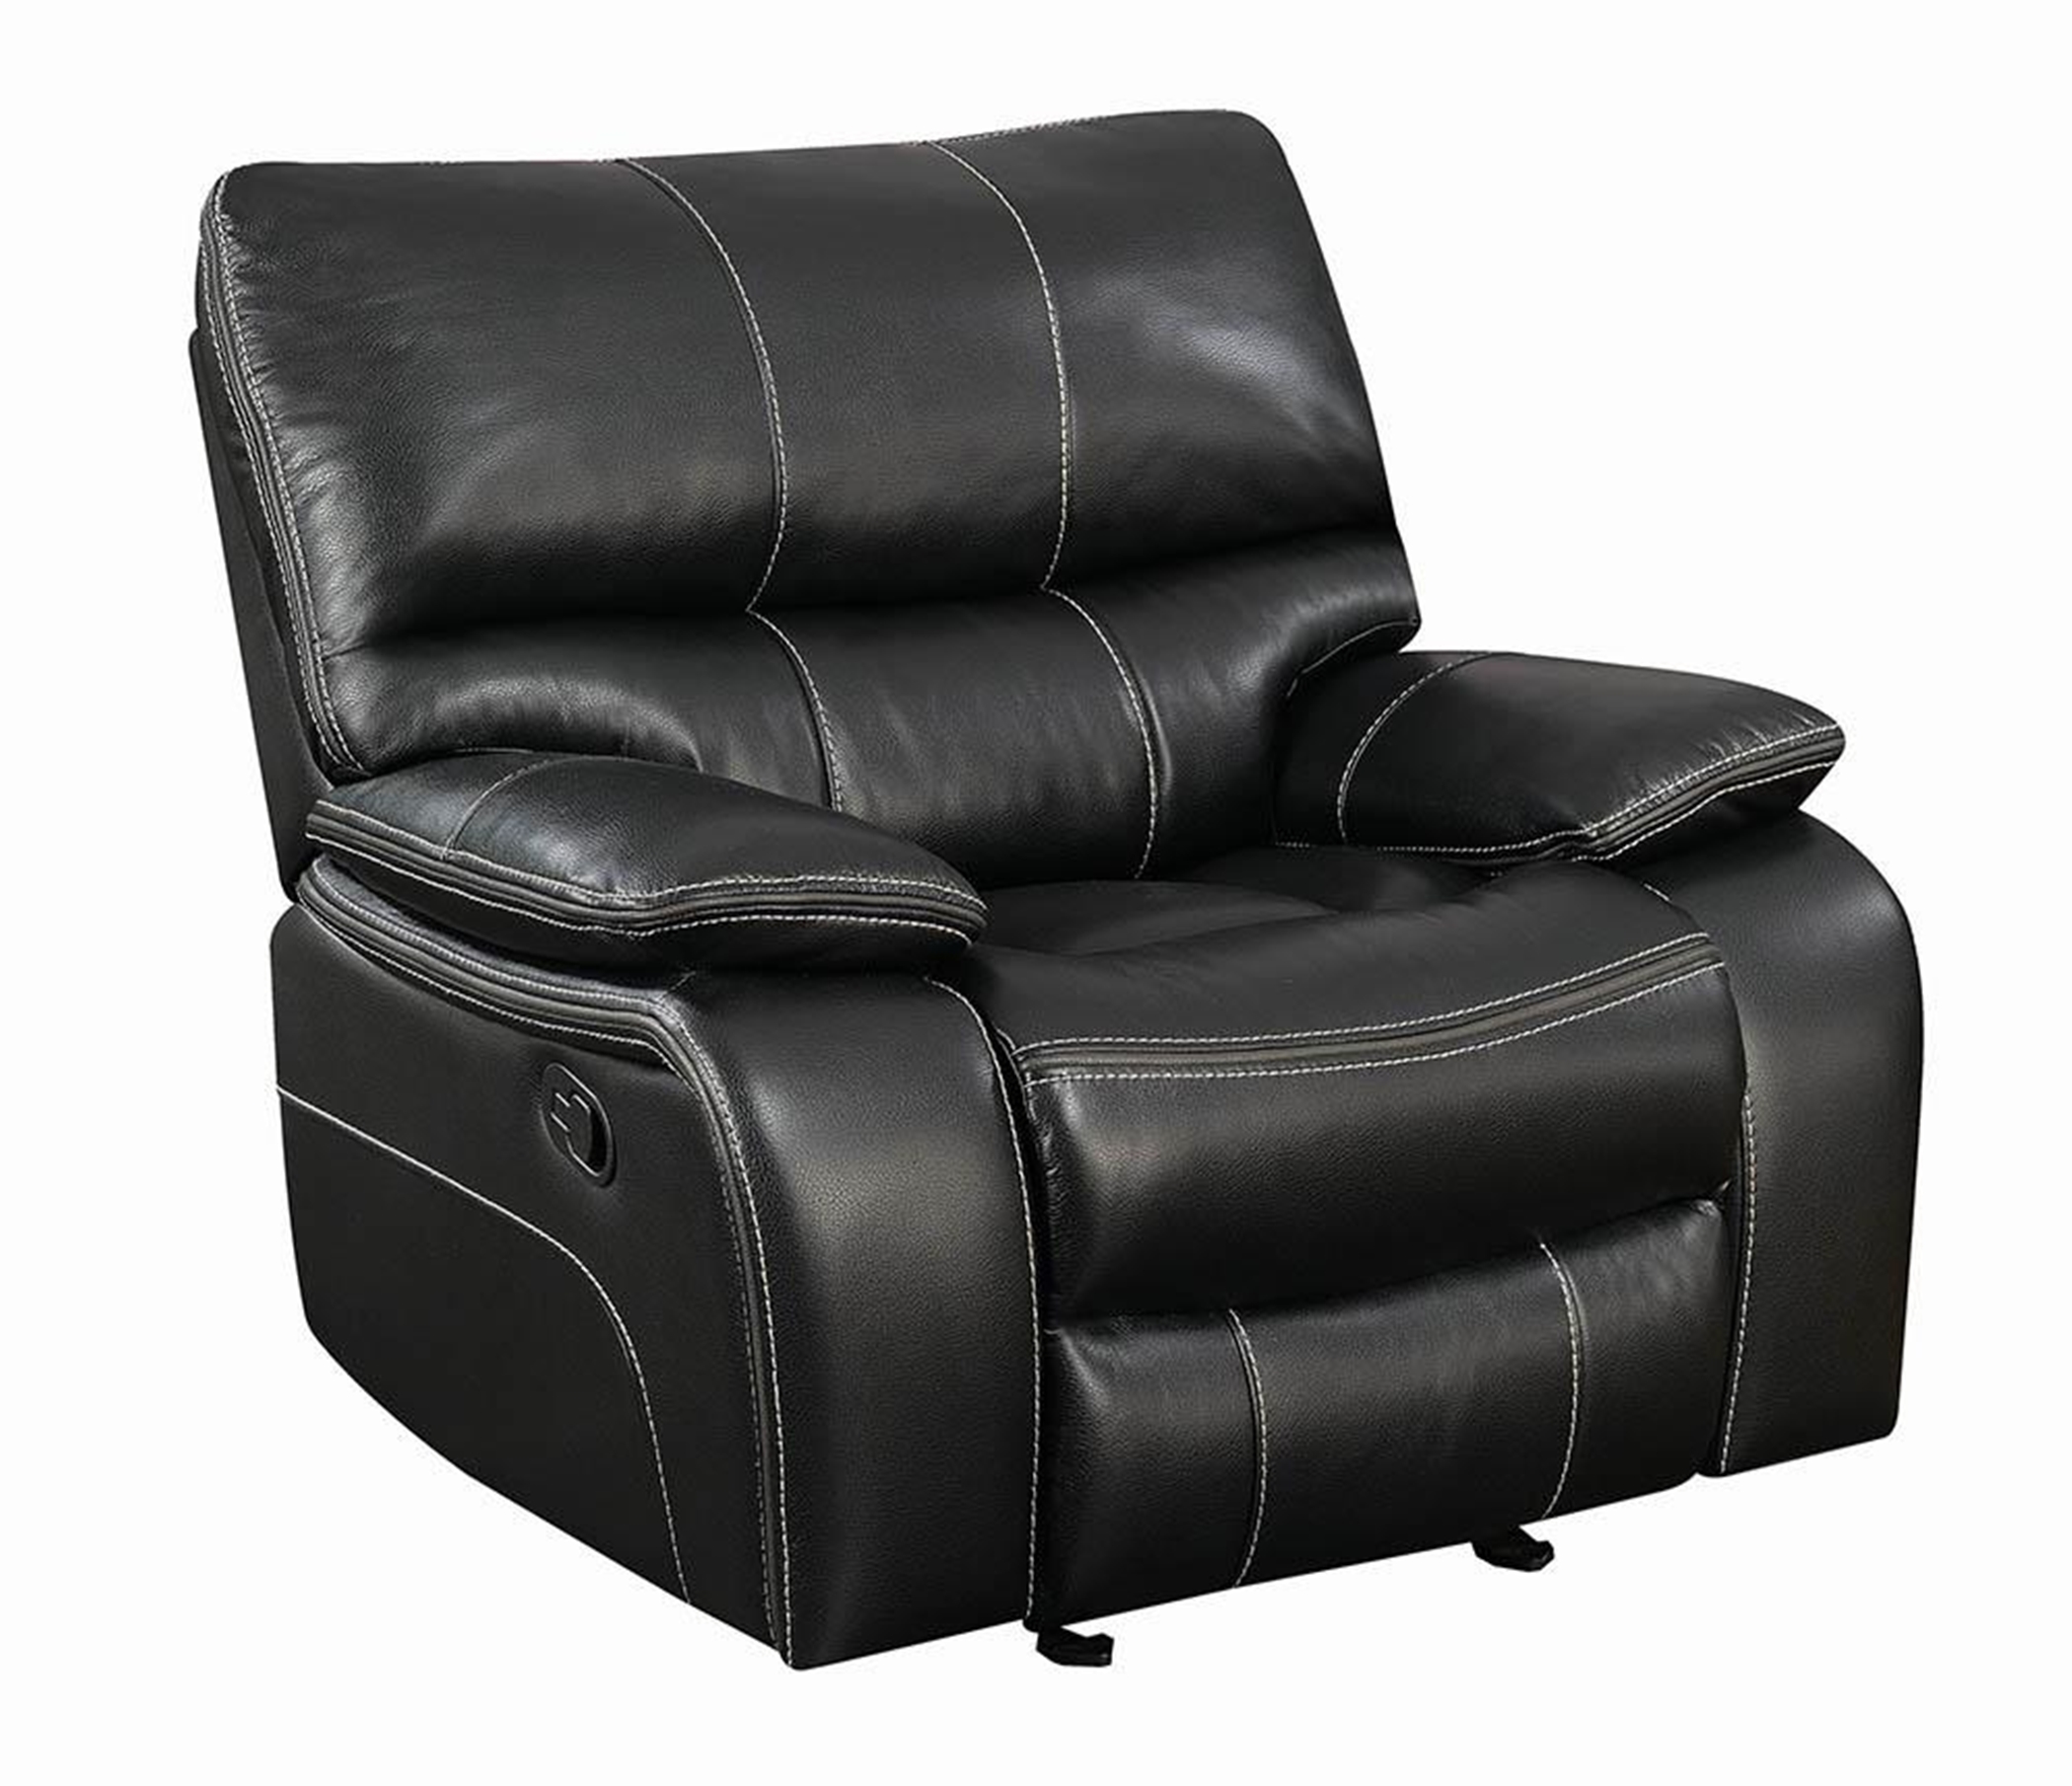 Willemse Black Glider Recliner - Click Image to Close